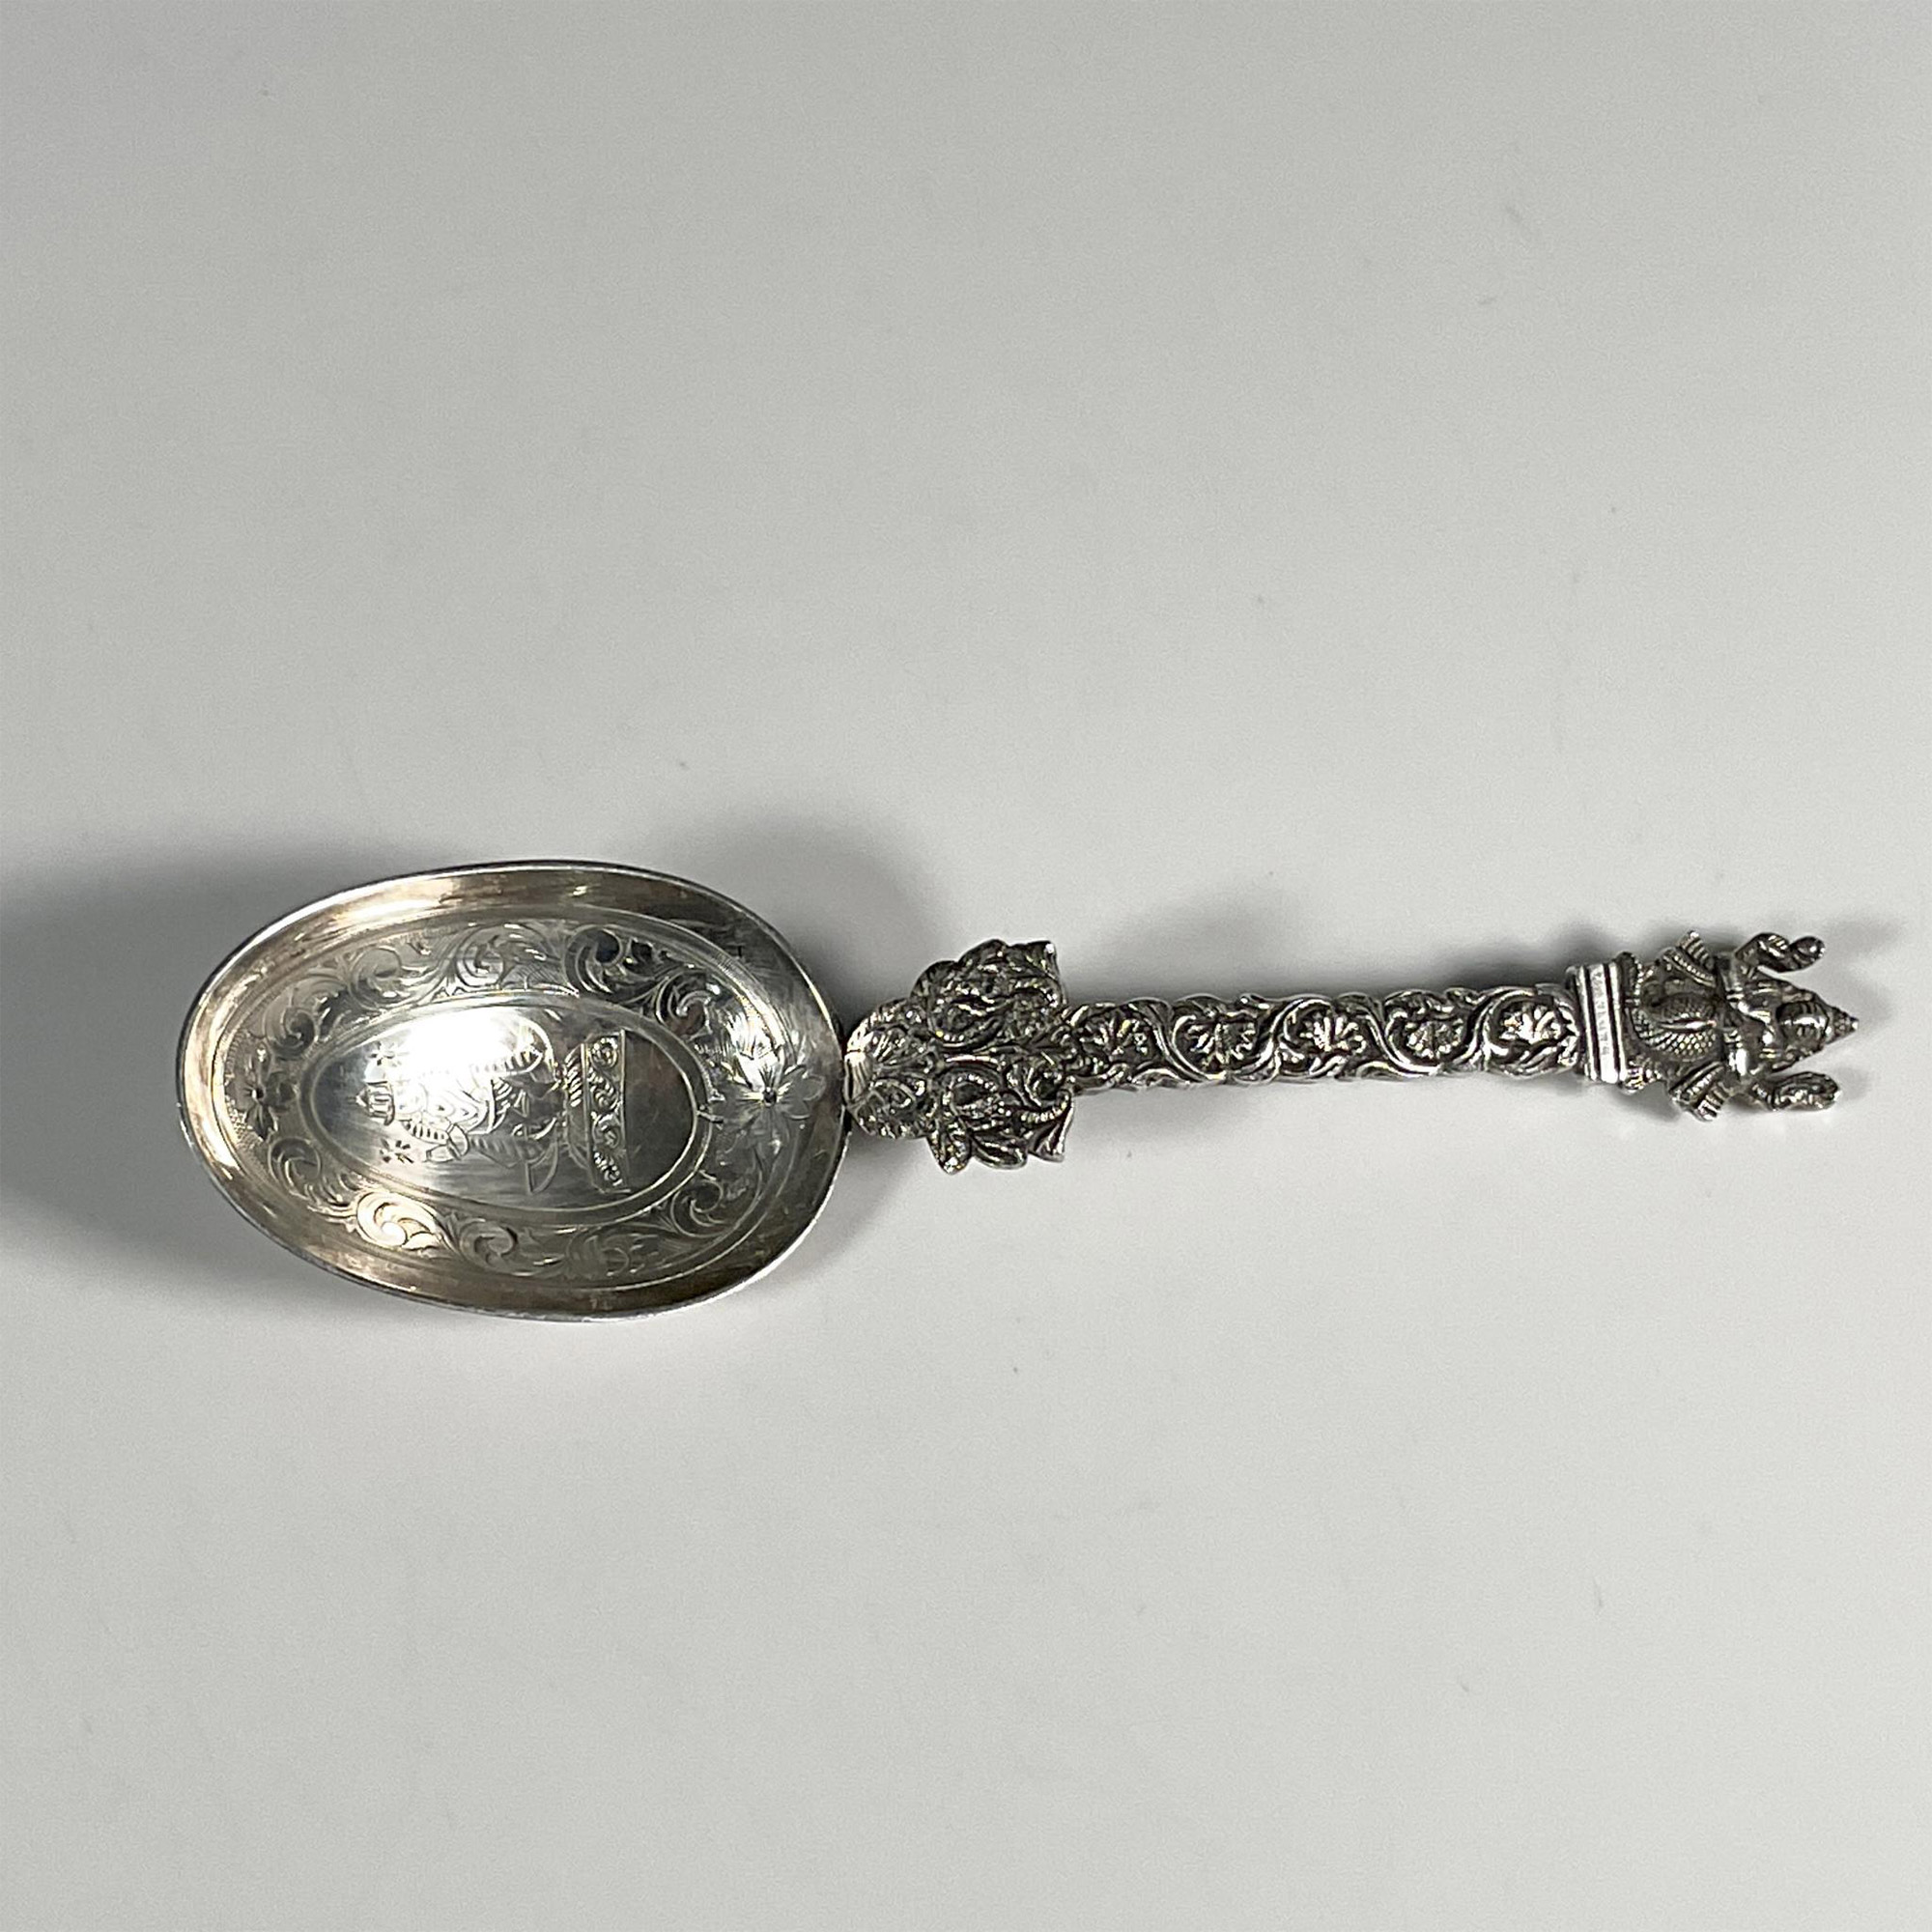 South East Asian Hallmarked Silver Spoon